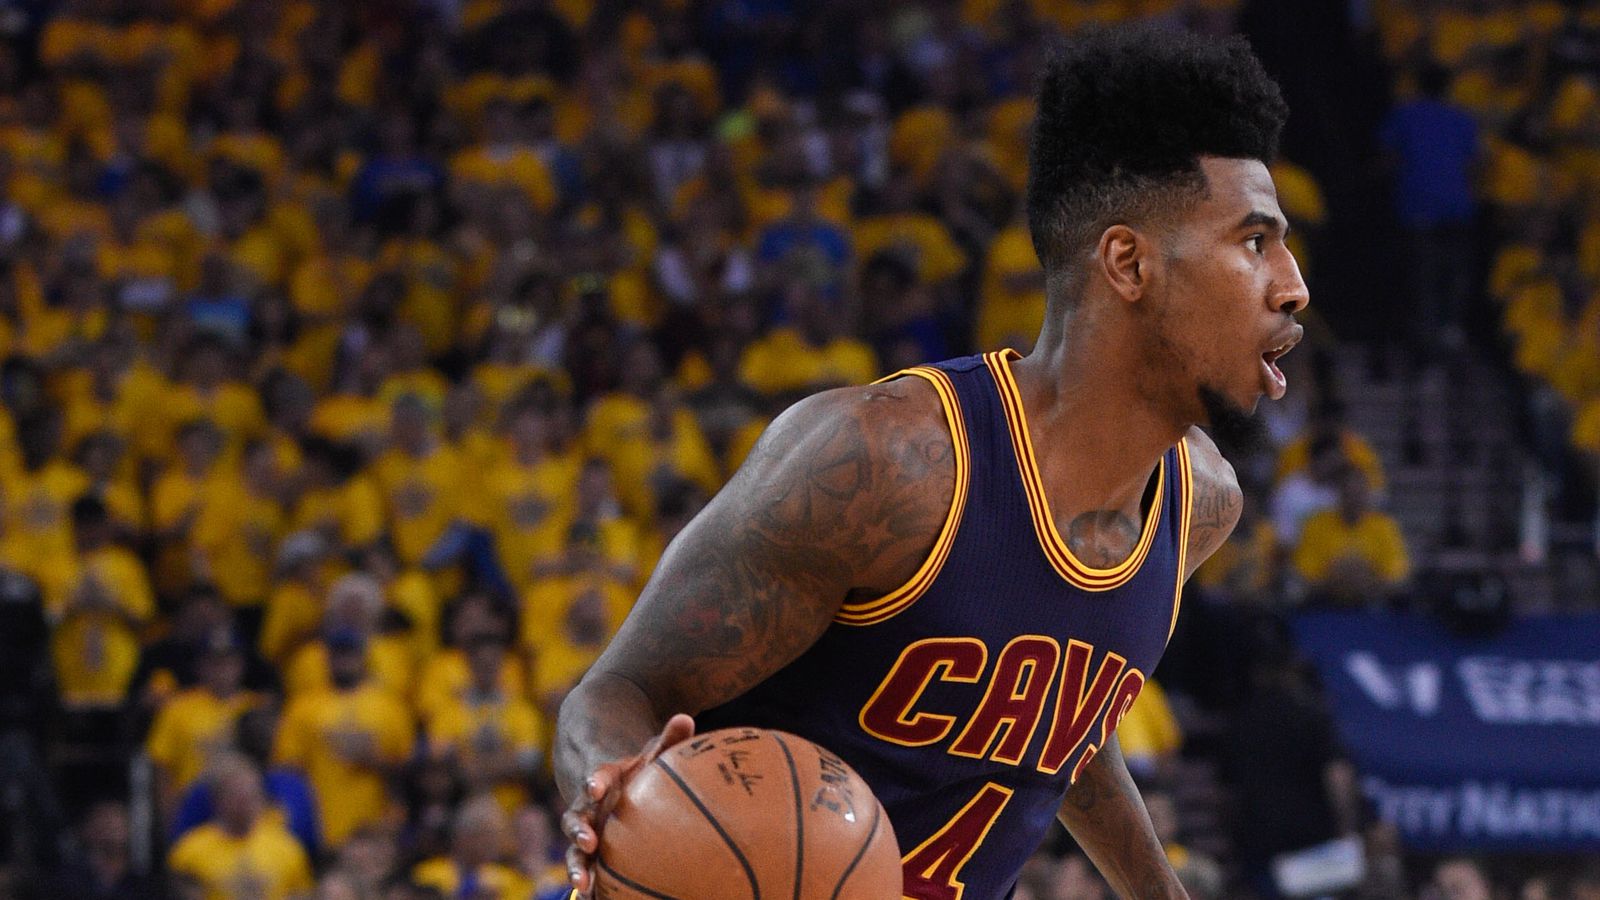 Shumpert out at least 3 months after wrist surgery.